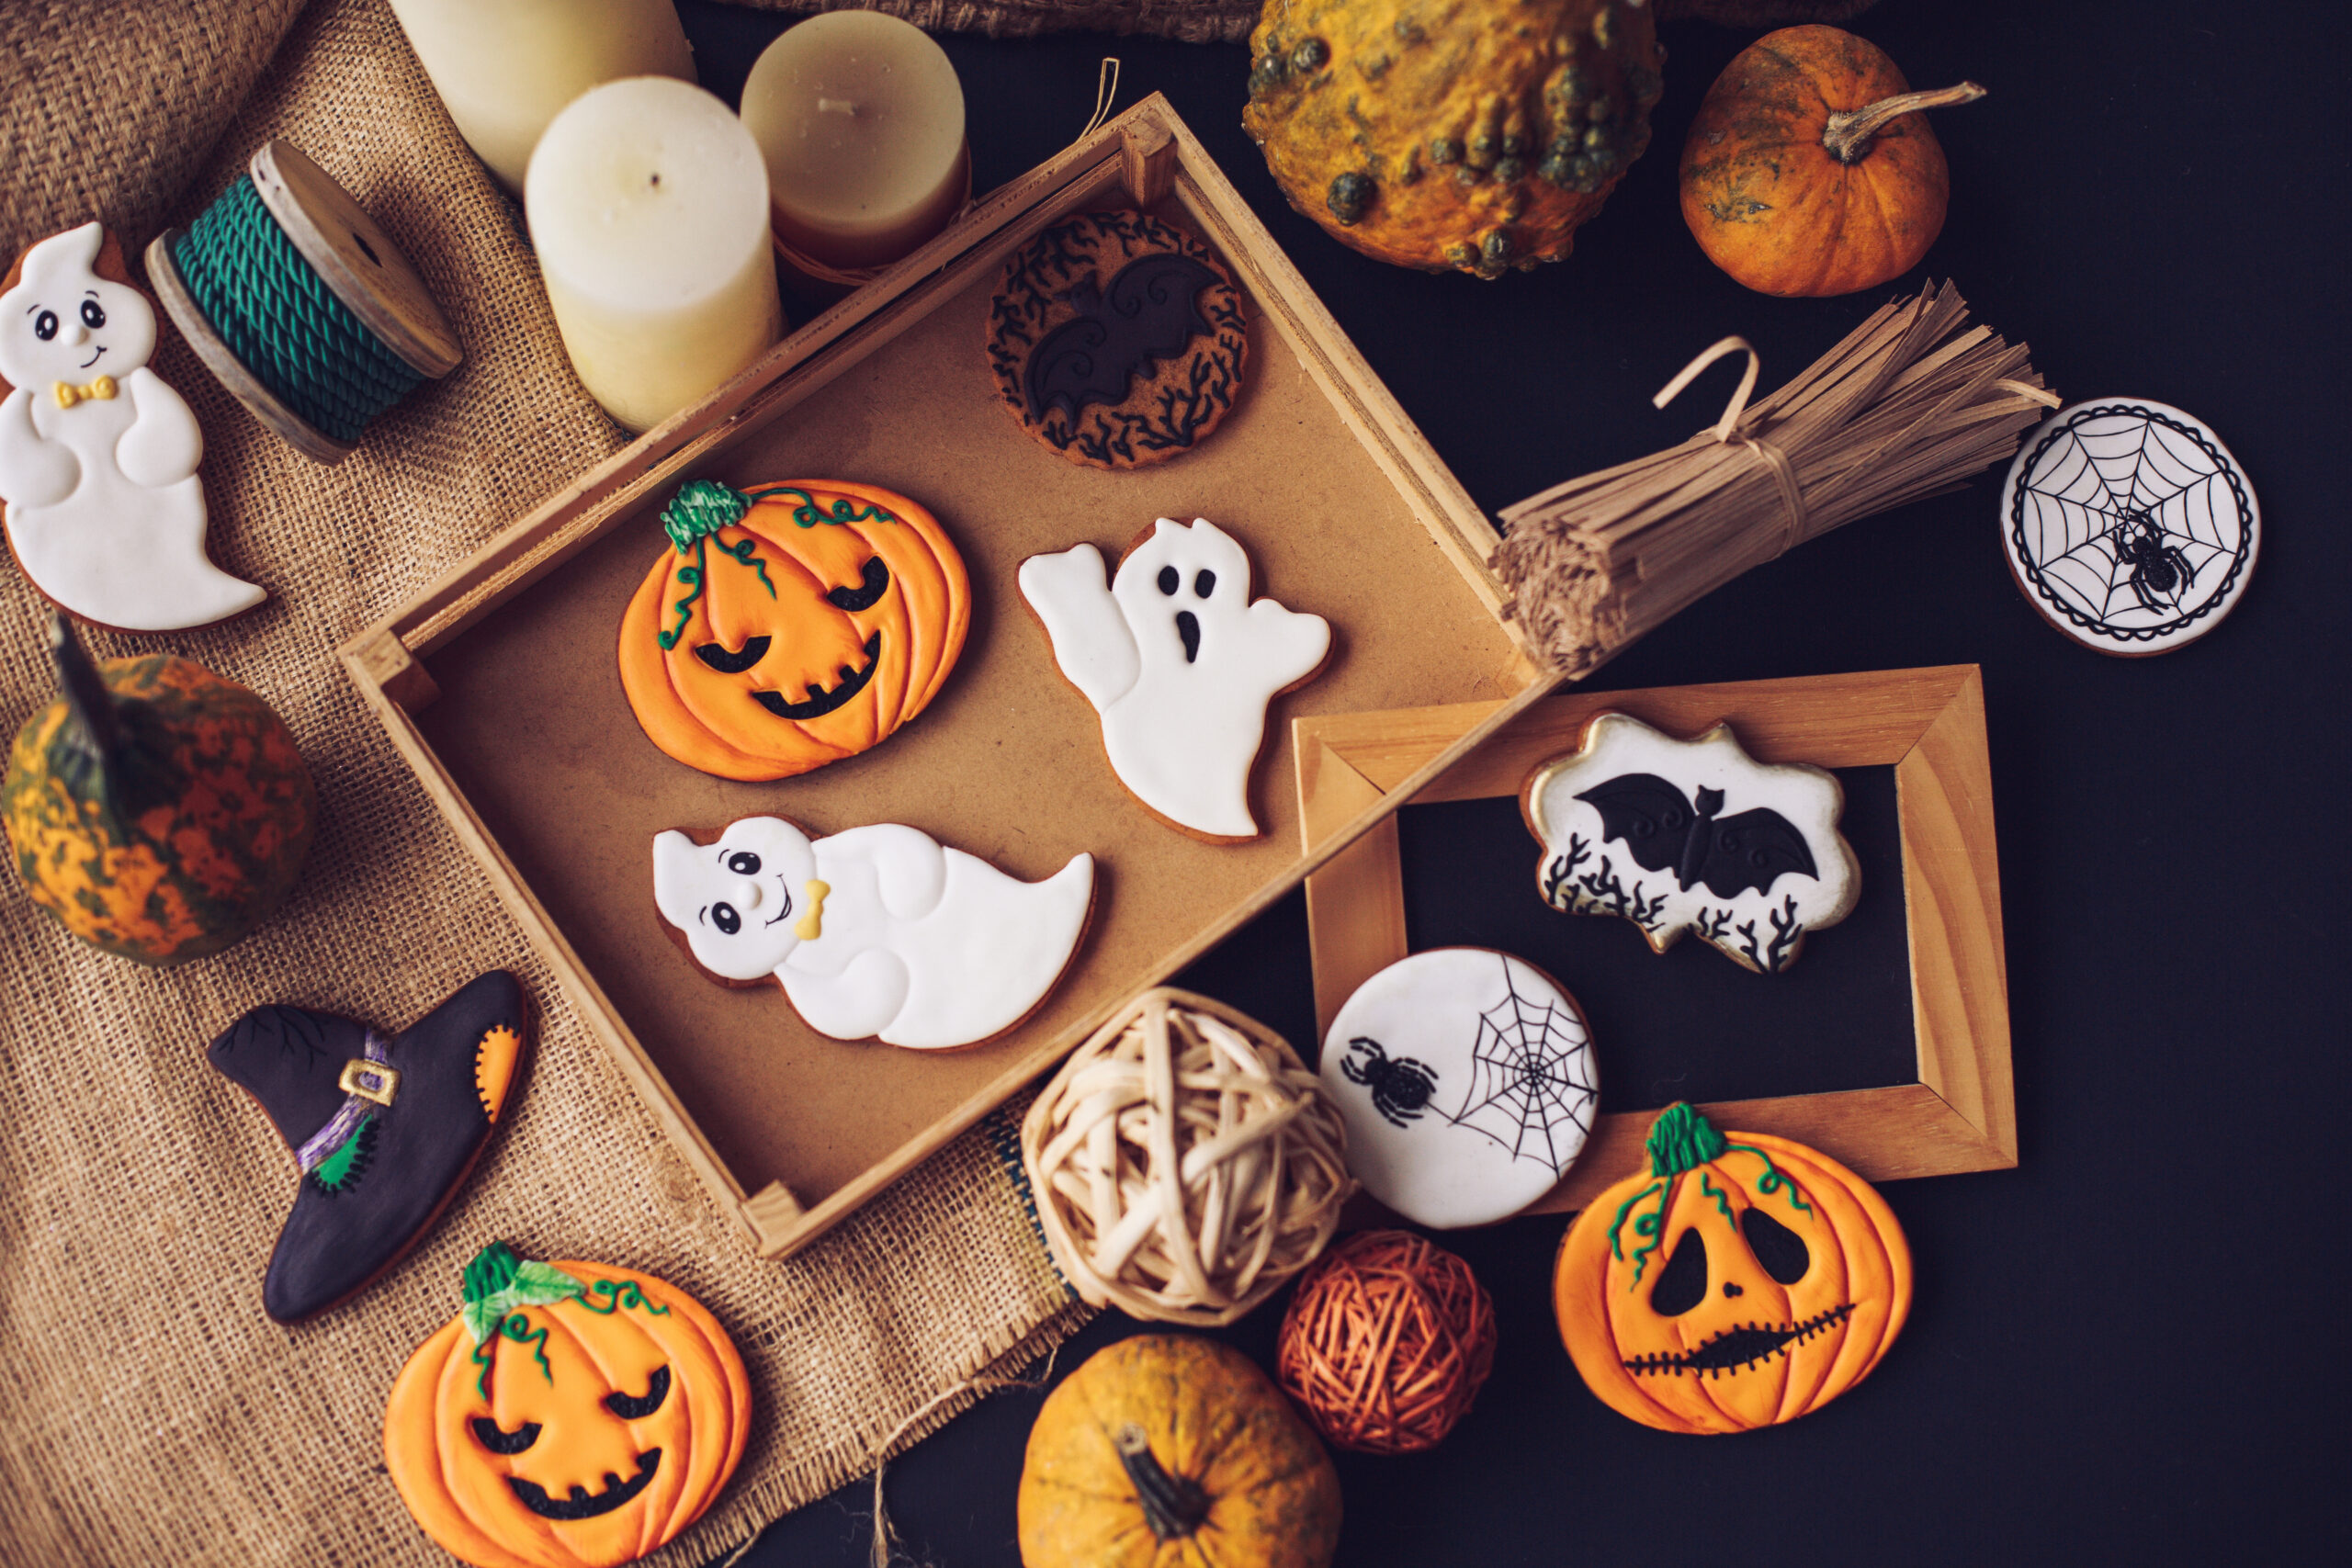 Simple Halloween Treats You Can Make at Home